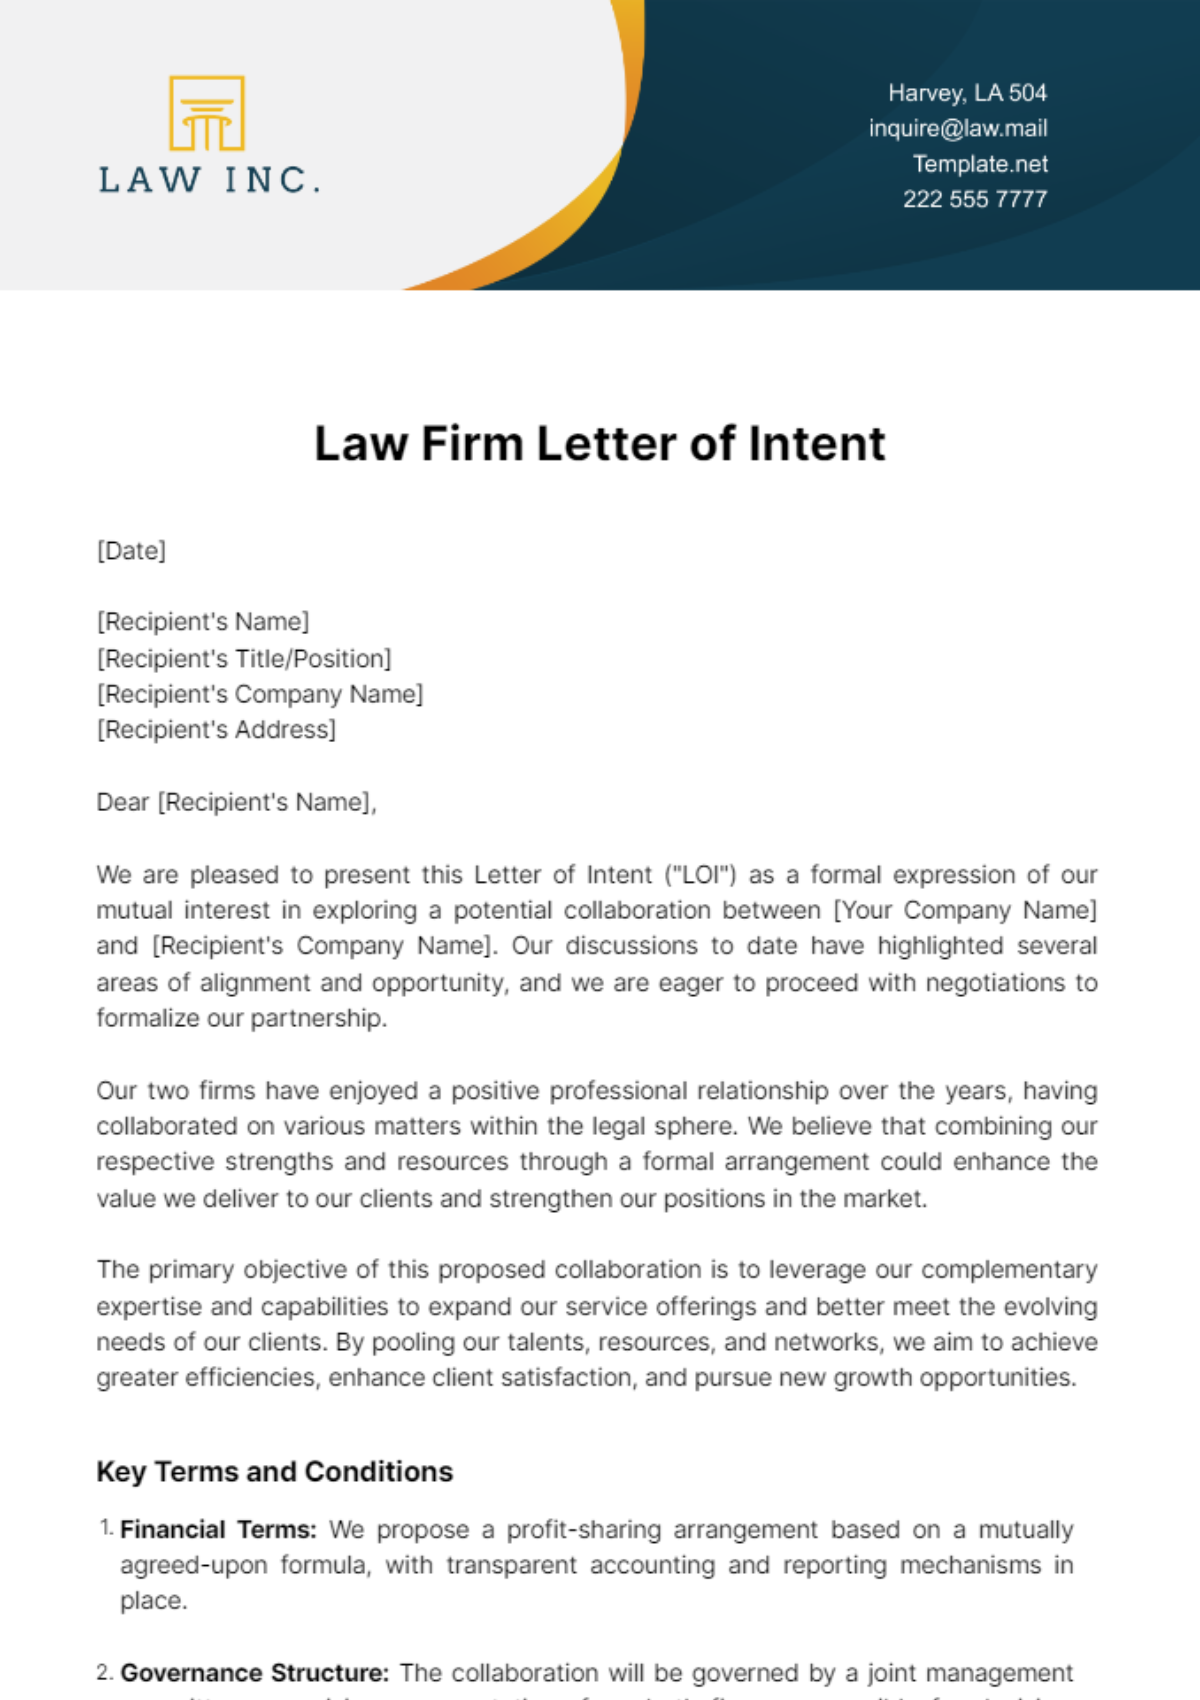 Law Firm Letter of Intent Template